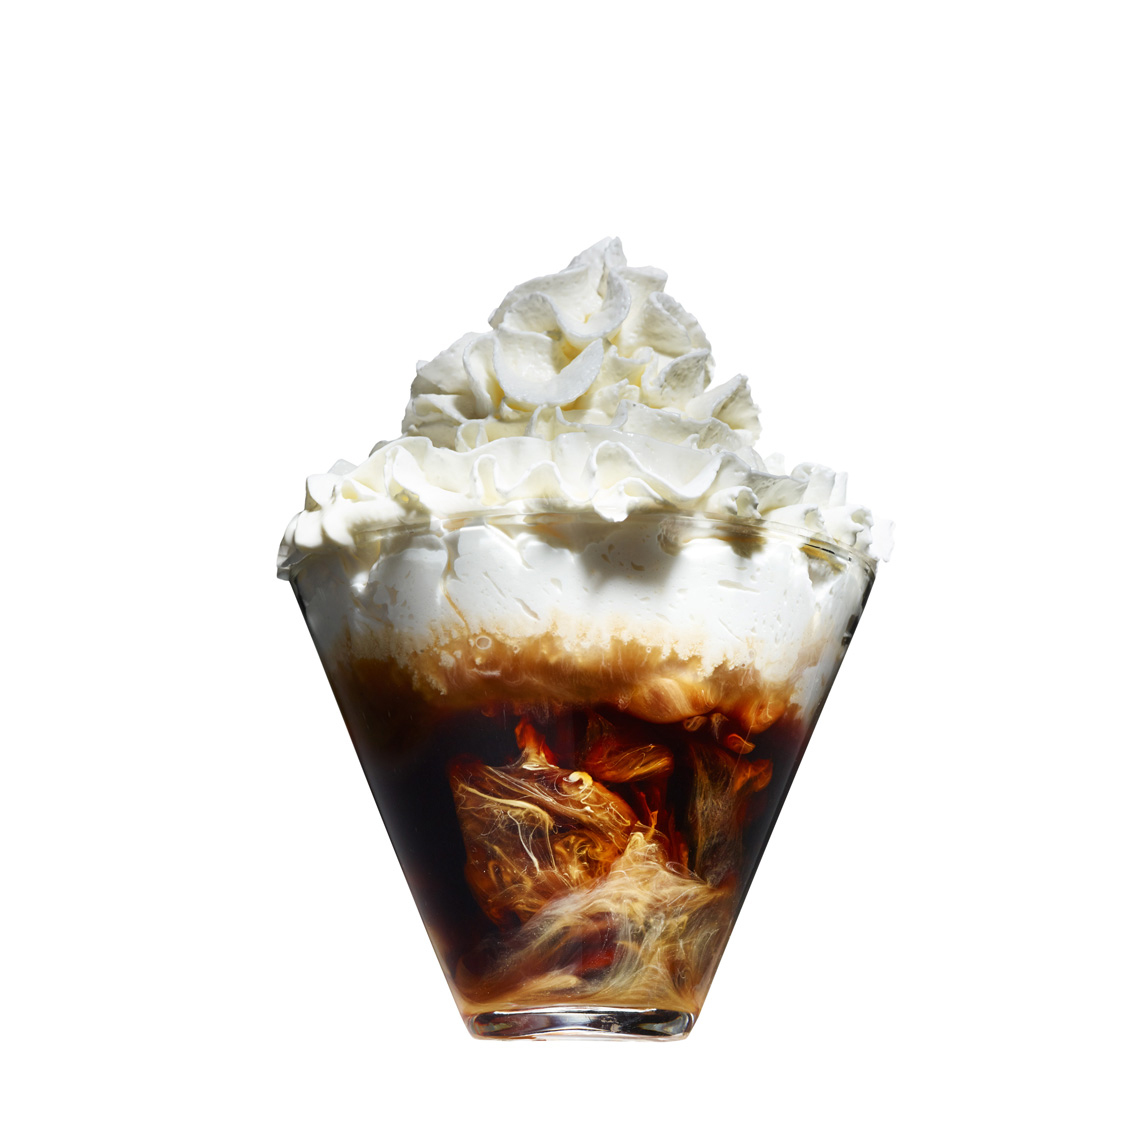 food stylist in San Francisco - Coffee with whipped cream for, photographed by Maren Caruso photographer